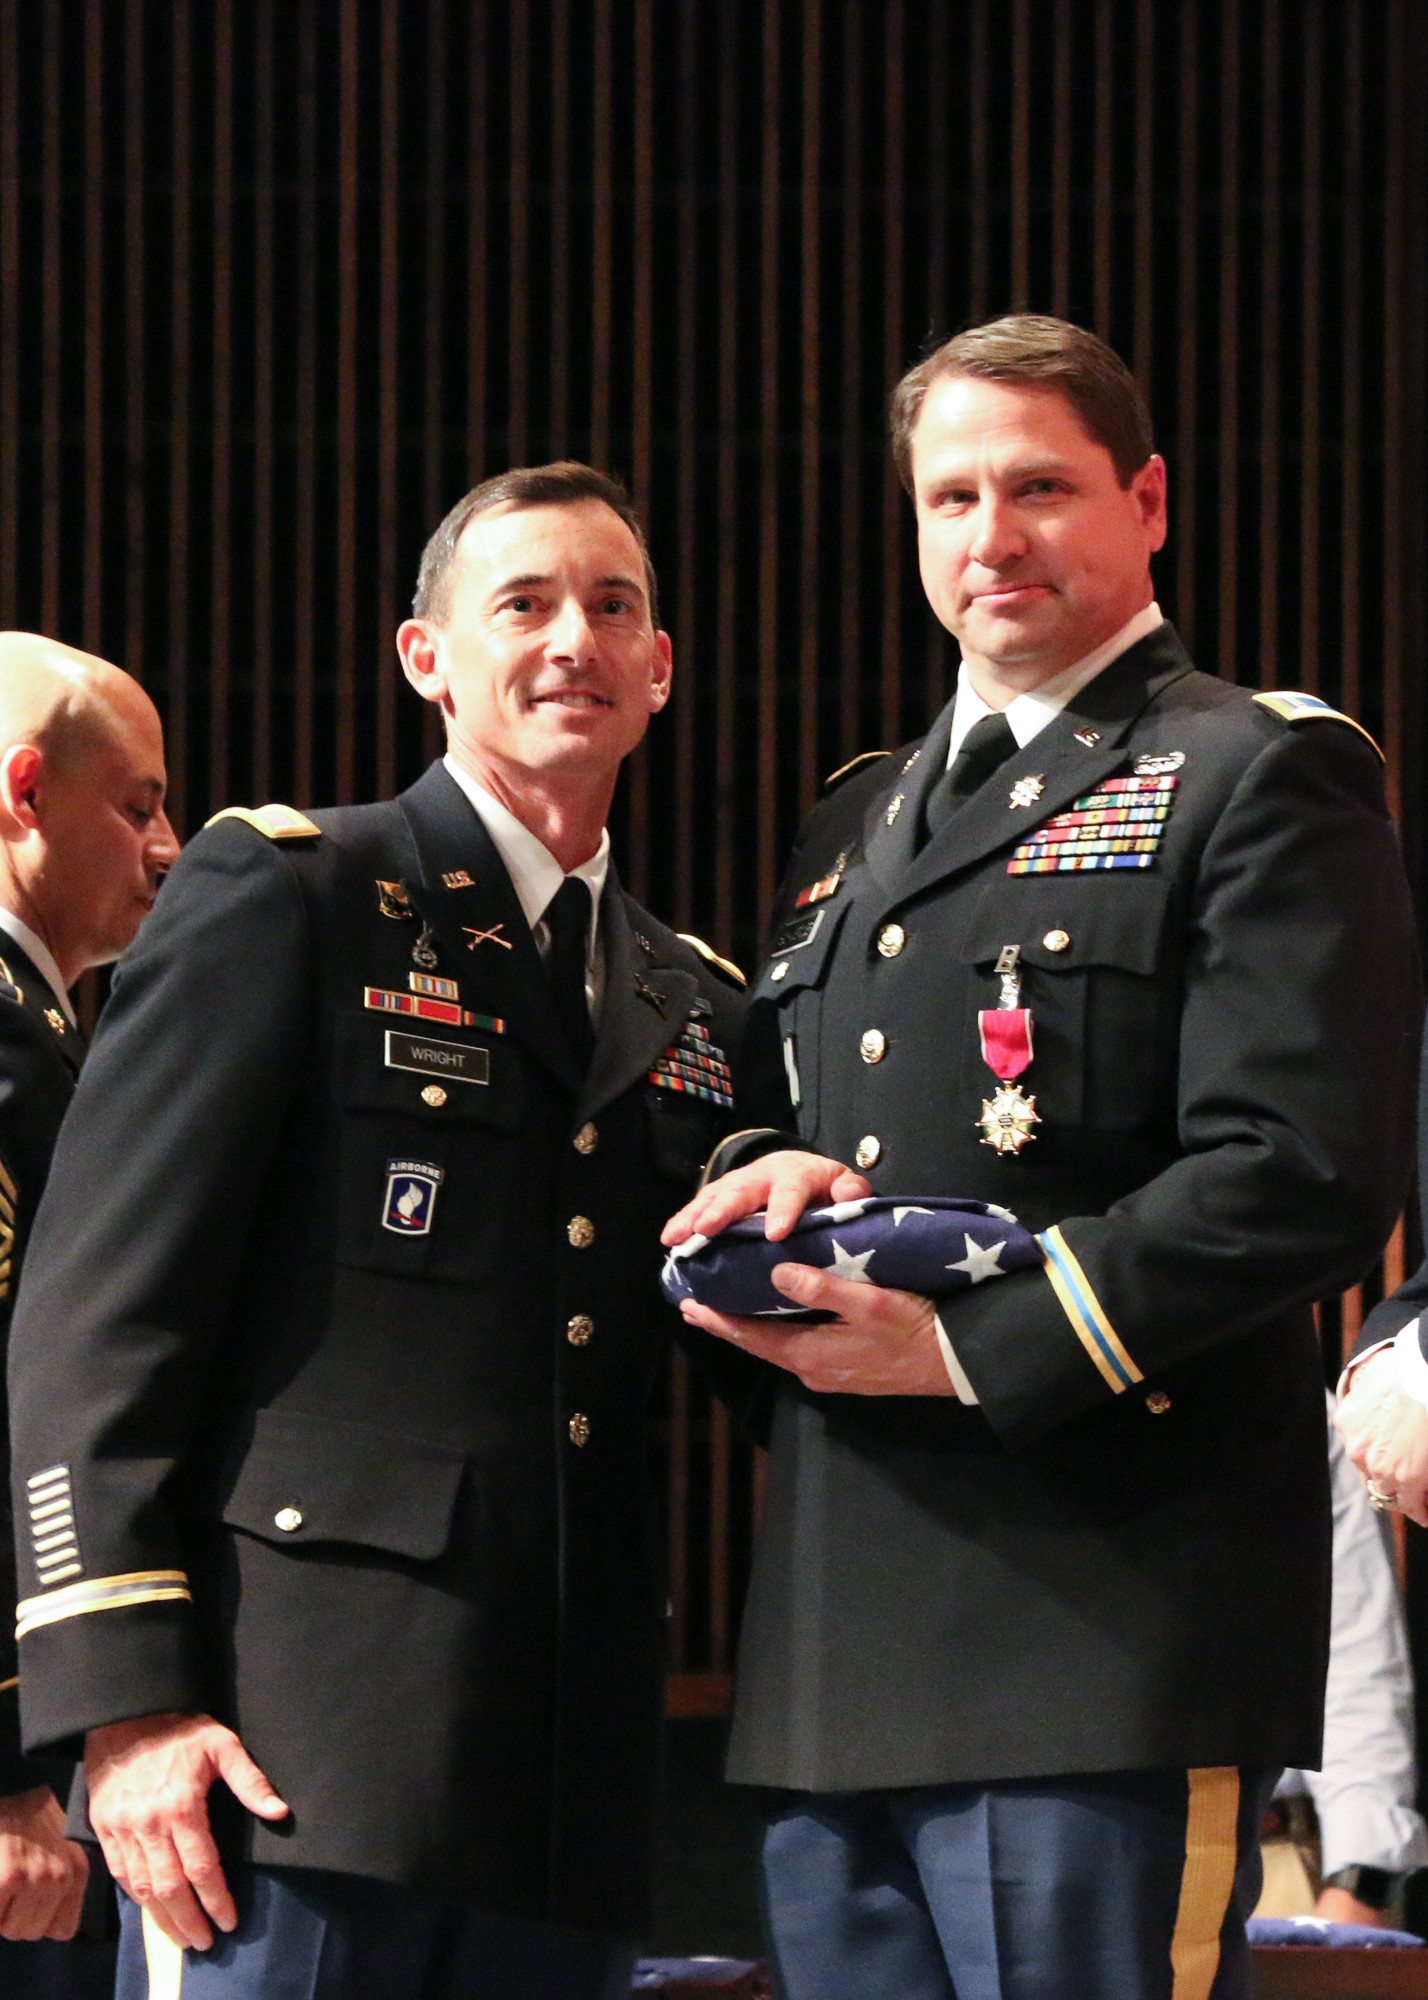 Ten Soldiers honored during retirement ceremony | Article | The United ...